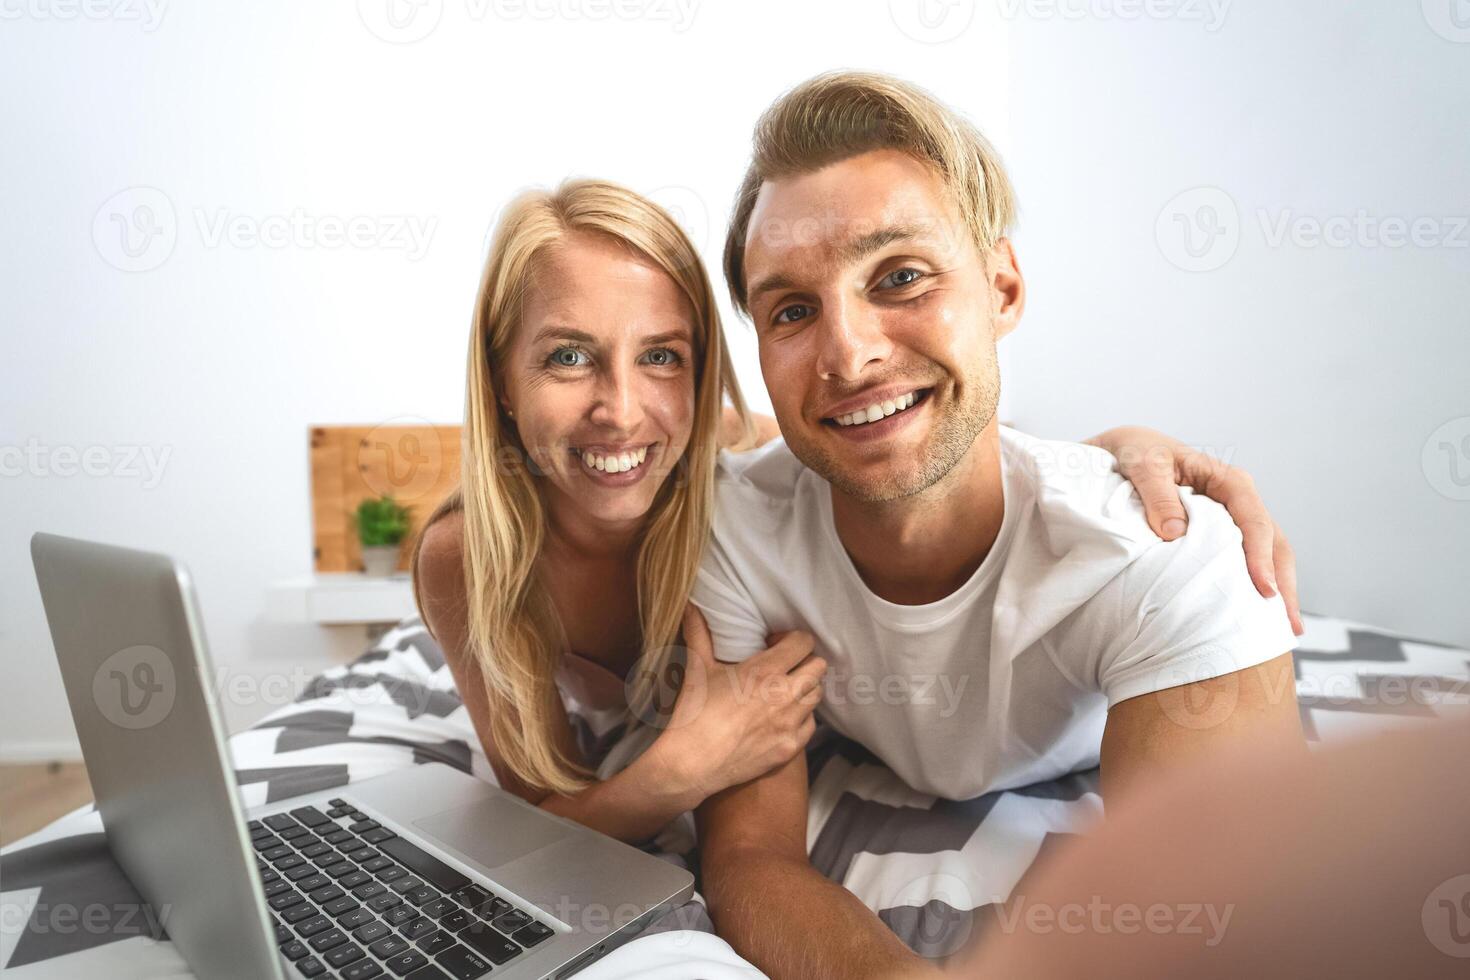 Young couple taking selfie in bed - Happy lovers having fun taking self photos lying on bed while using laptop in bedroom - Love relationship and youth culture lifestyle concept